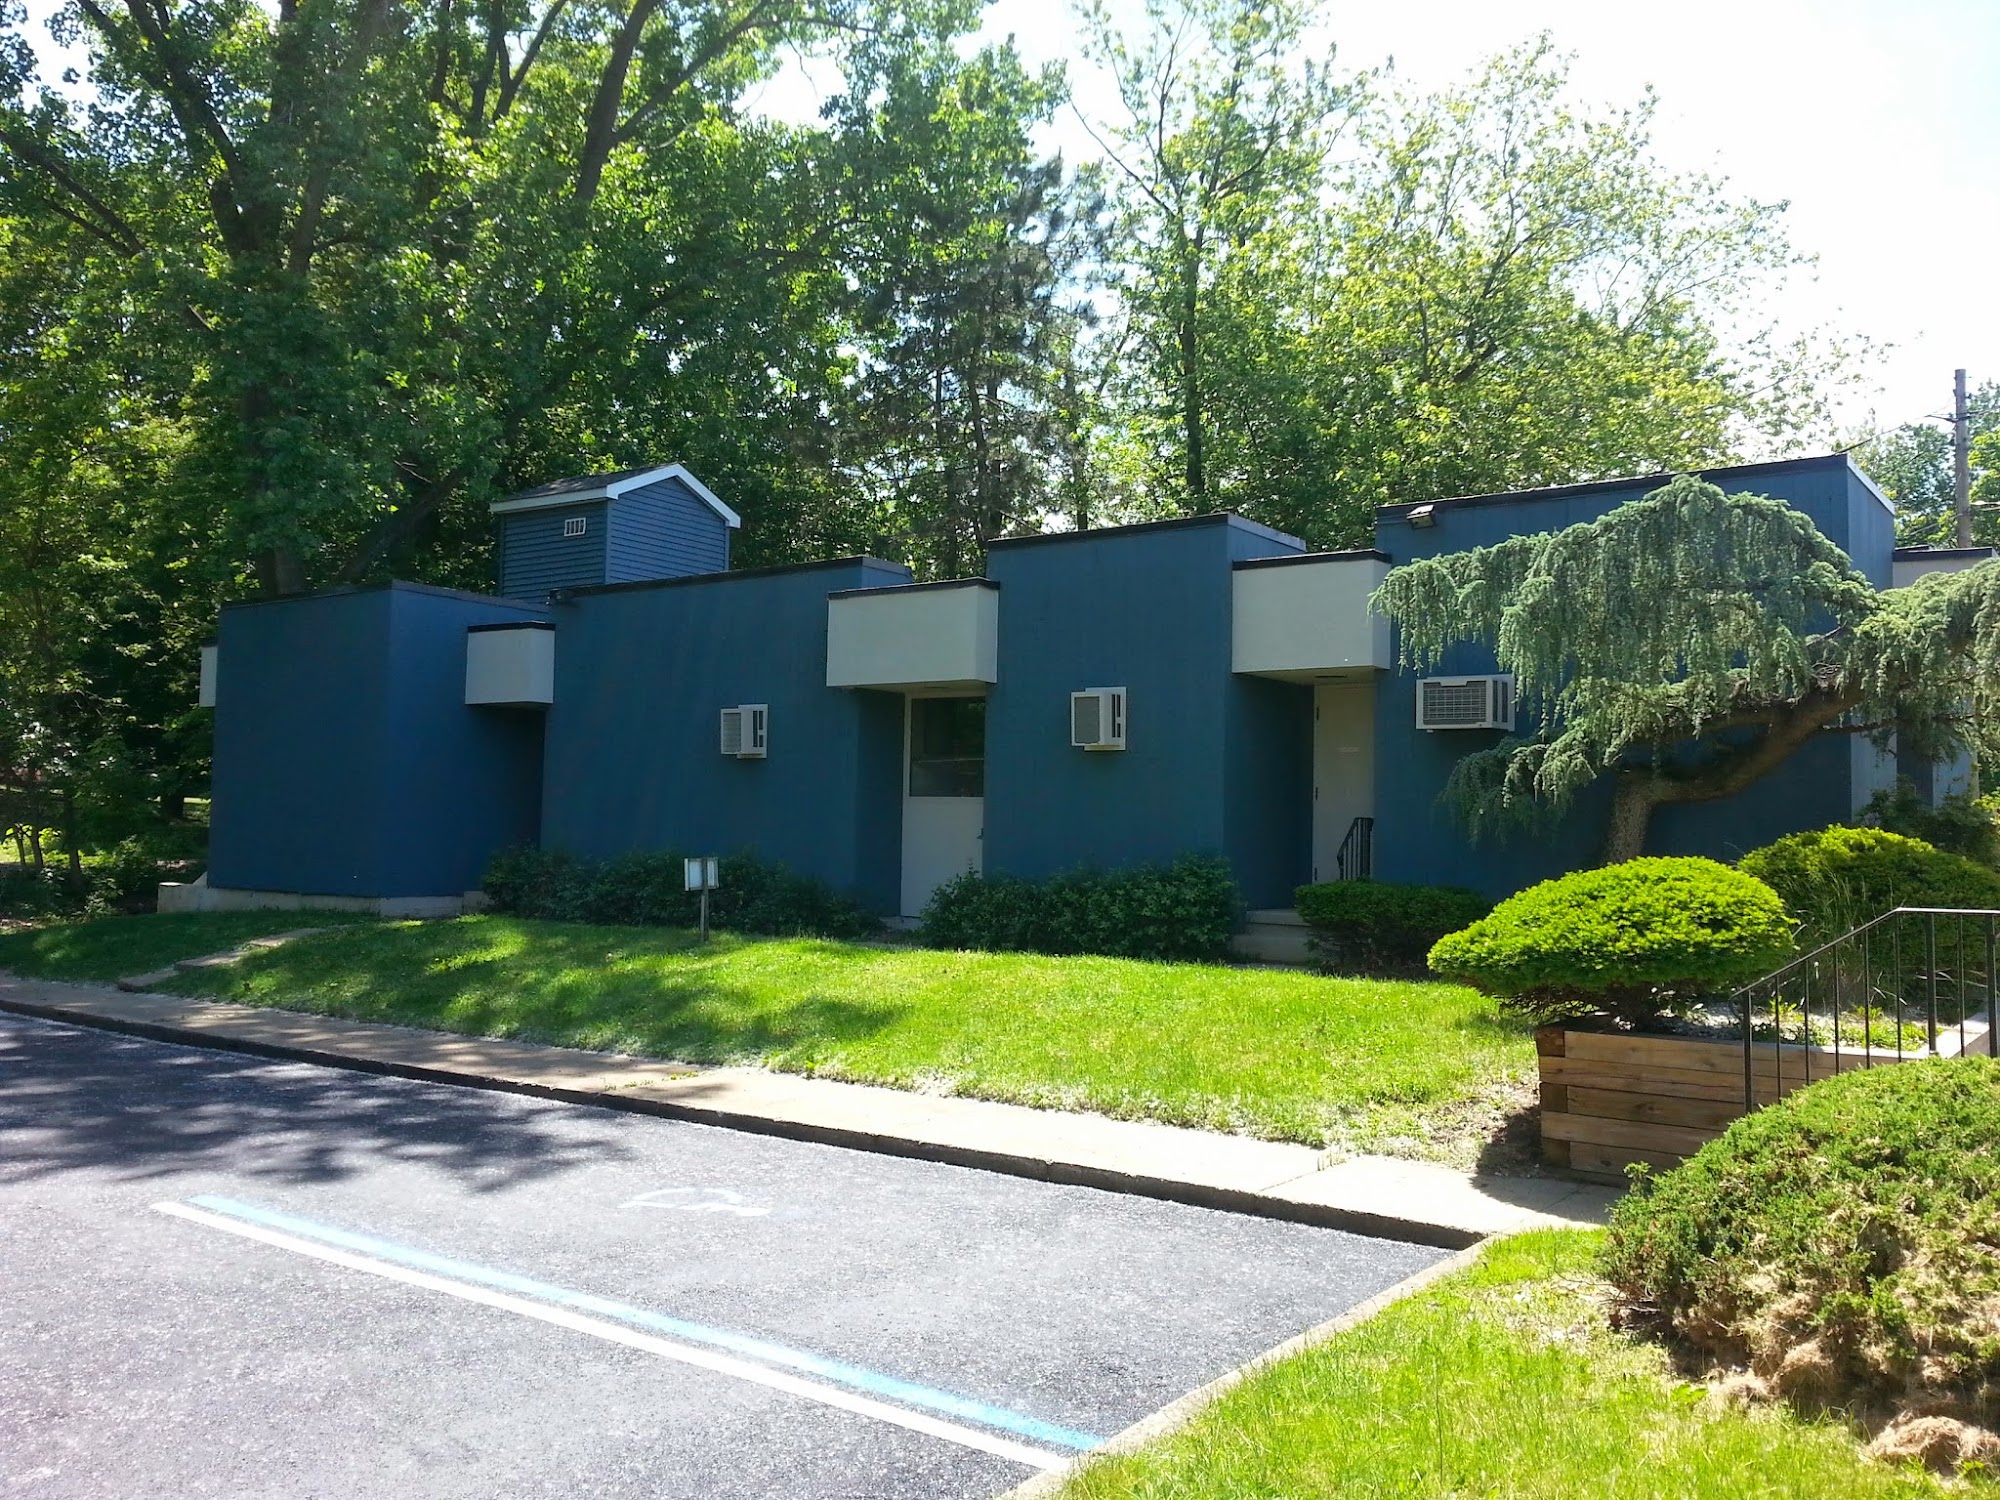 The Spay & Neuter Center of New Jersey